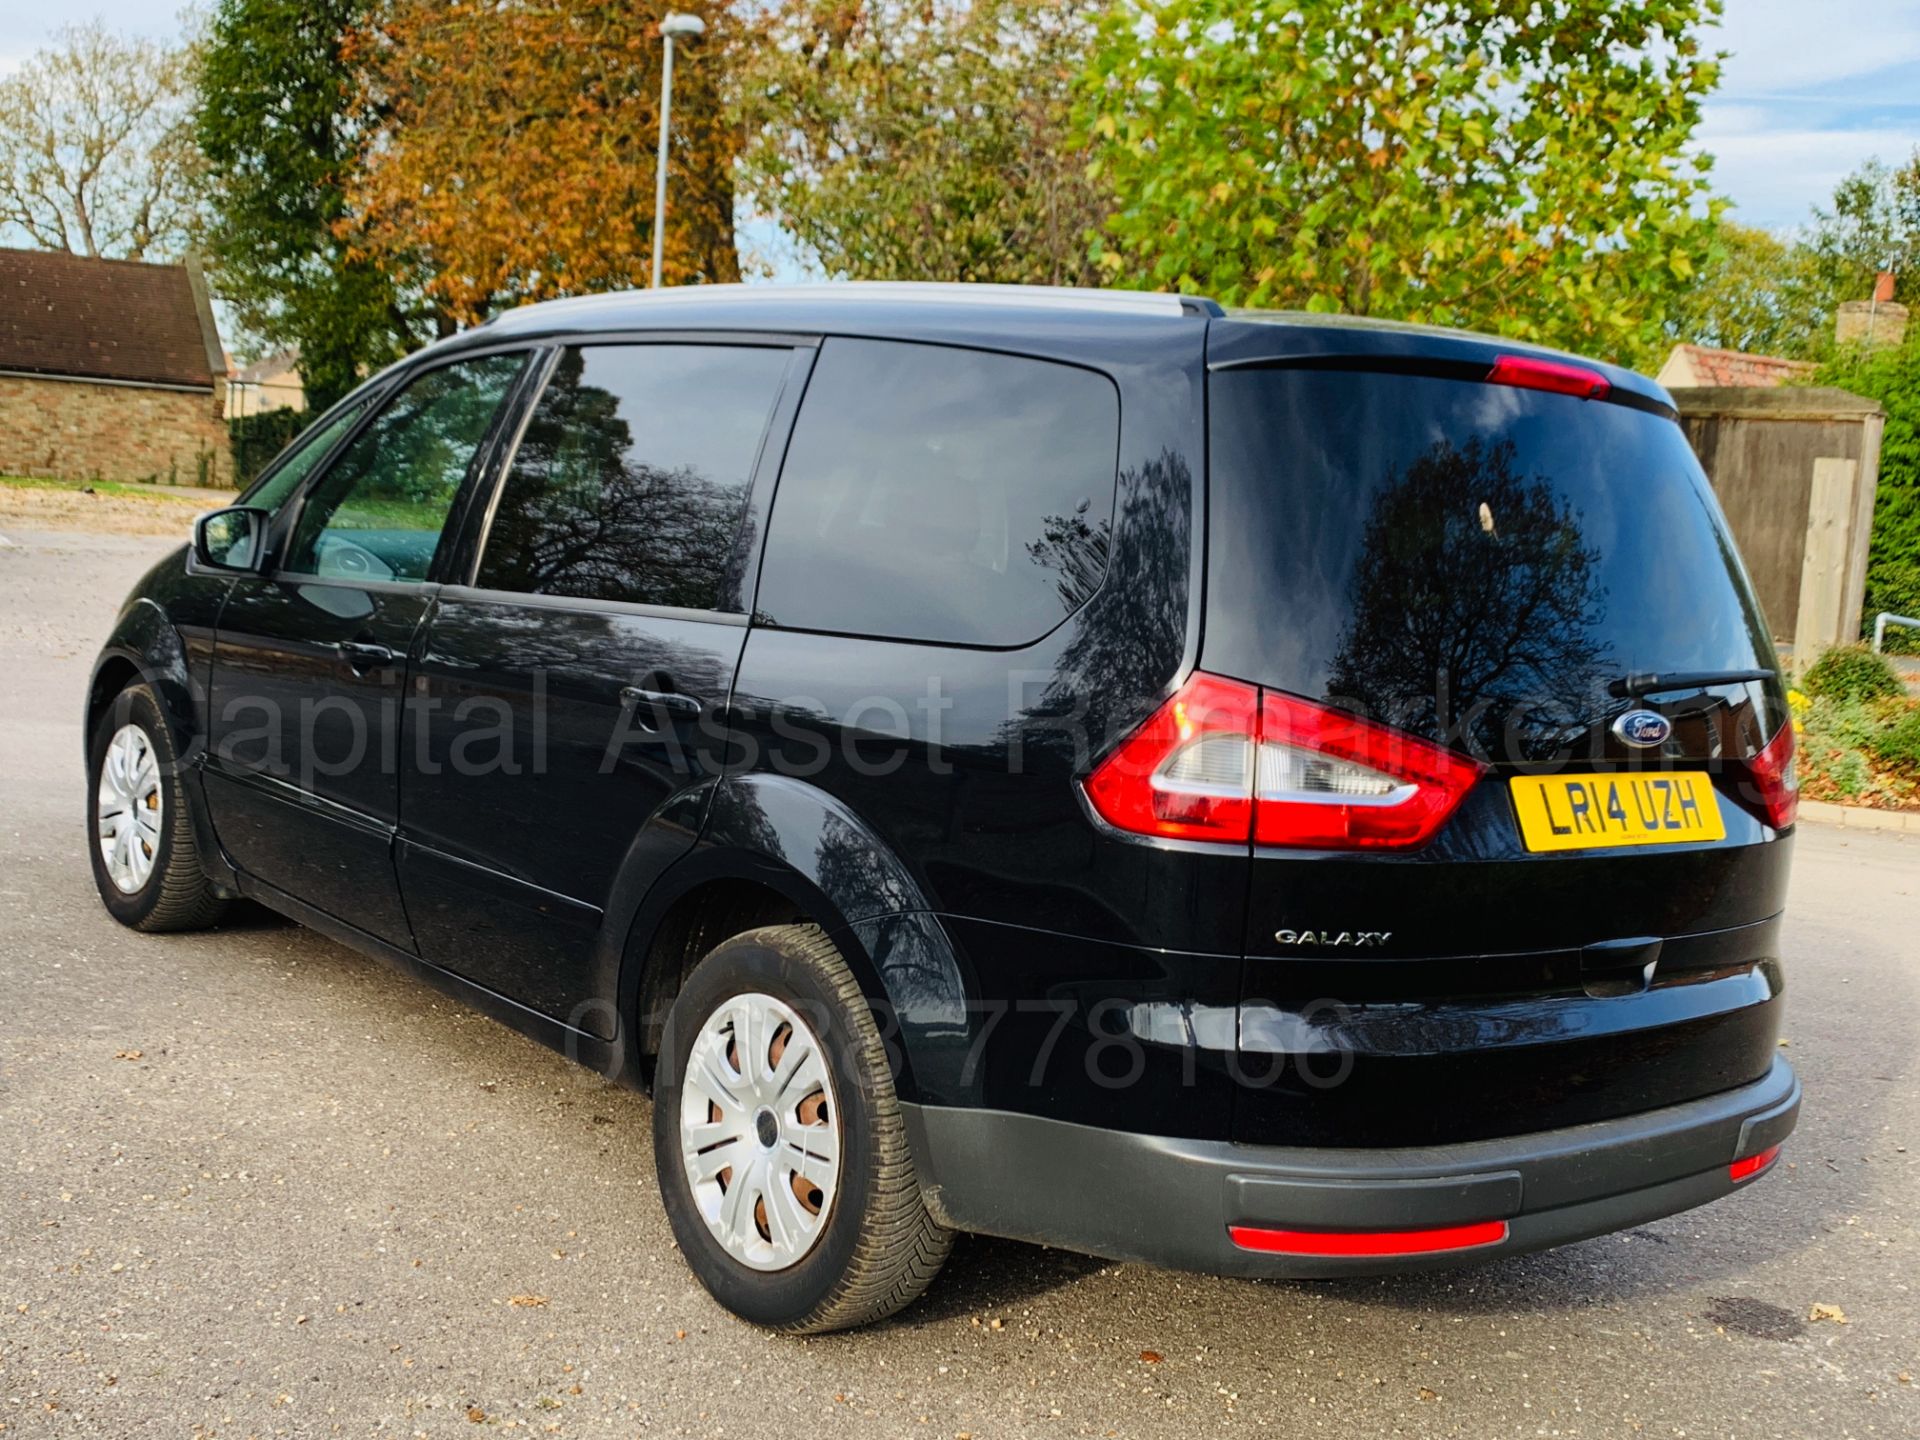 (ON SALE) FORD GALAXY **ZETEC** 7 SEATER MPV (2014) 2.0 TDCI - 140 BHP - AUTO POWER SHIFT (1 OWNER) - Image 7 of 37